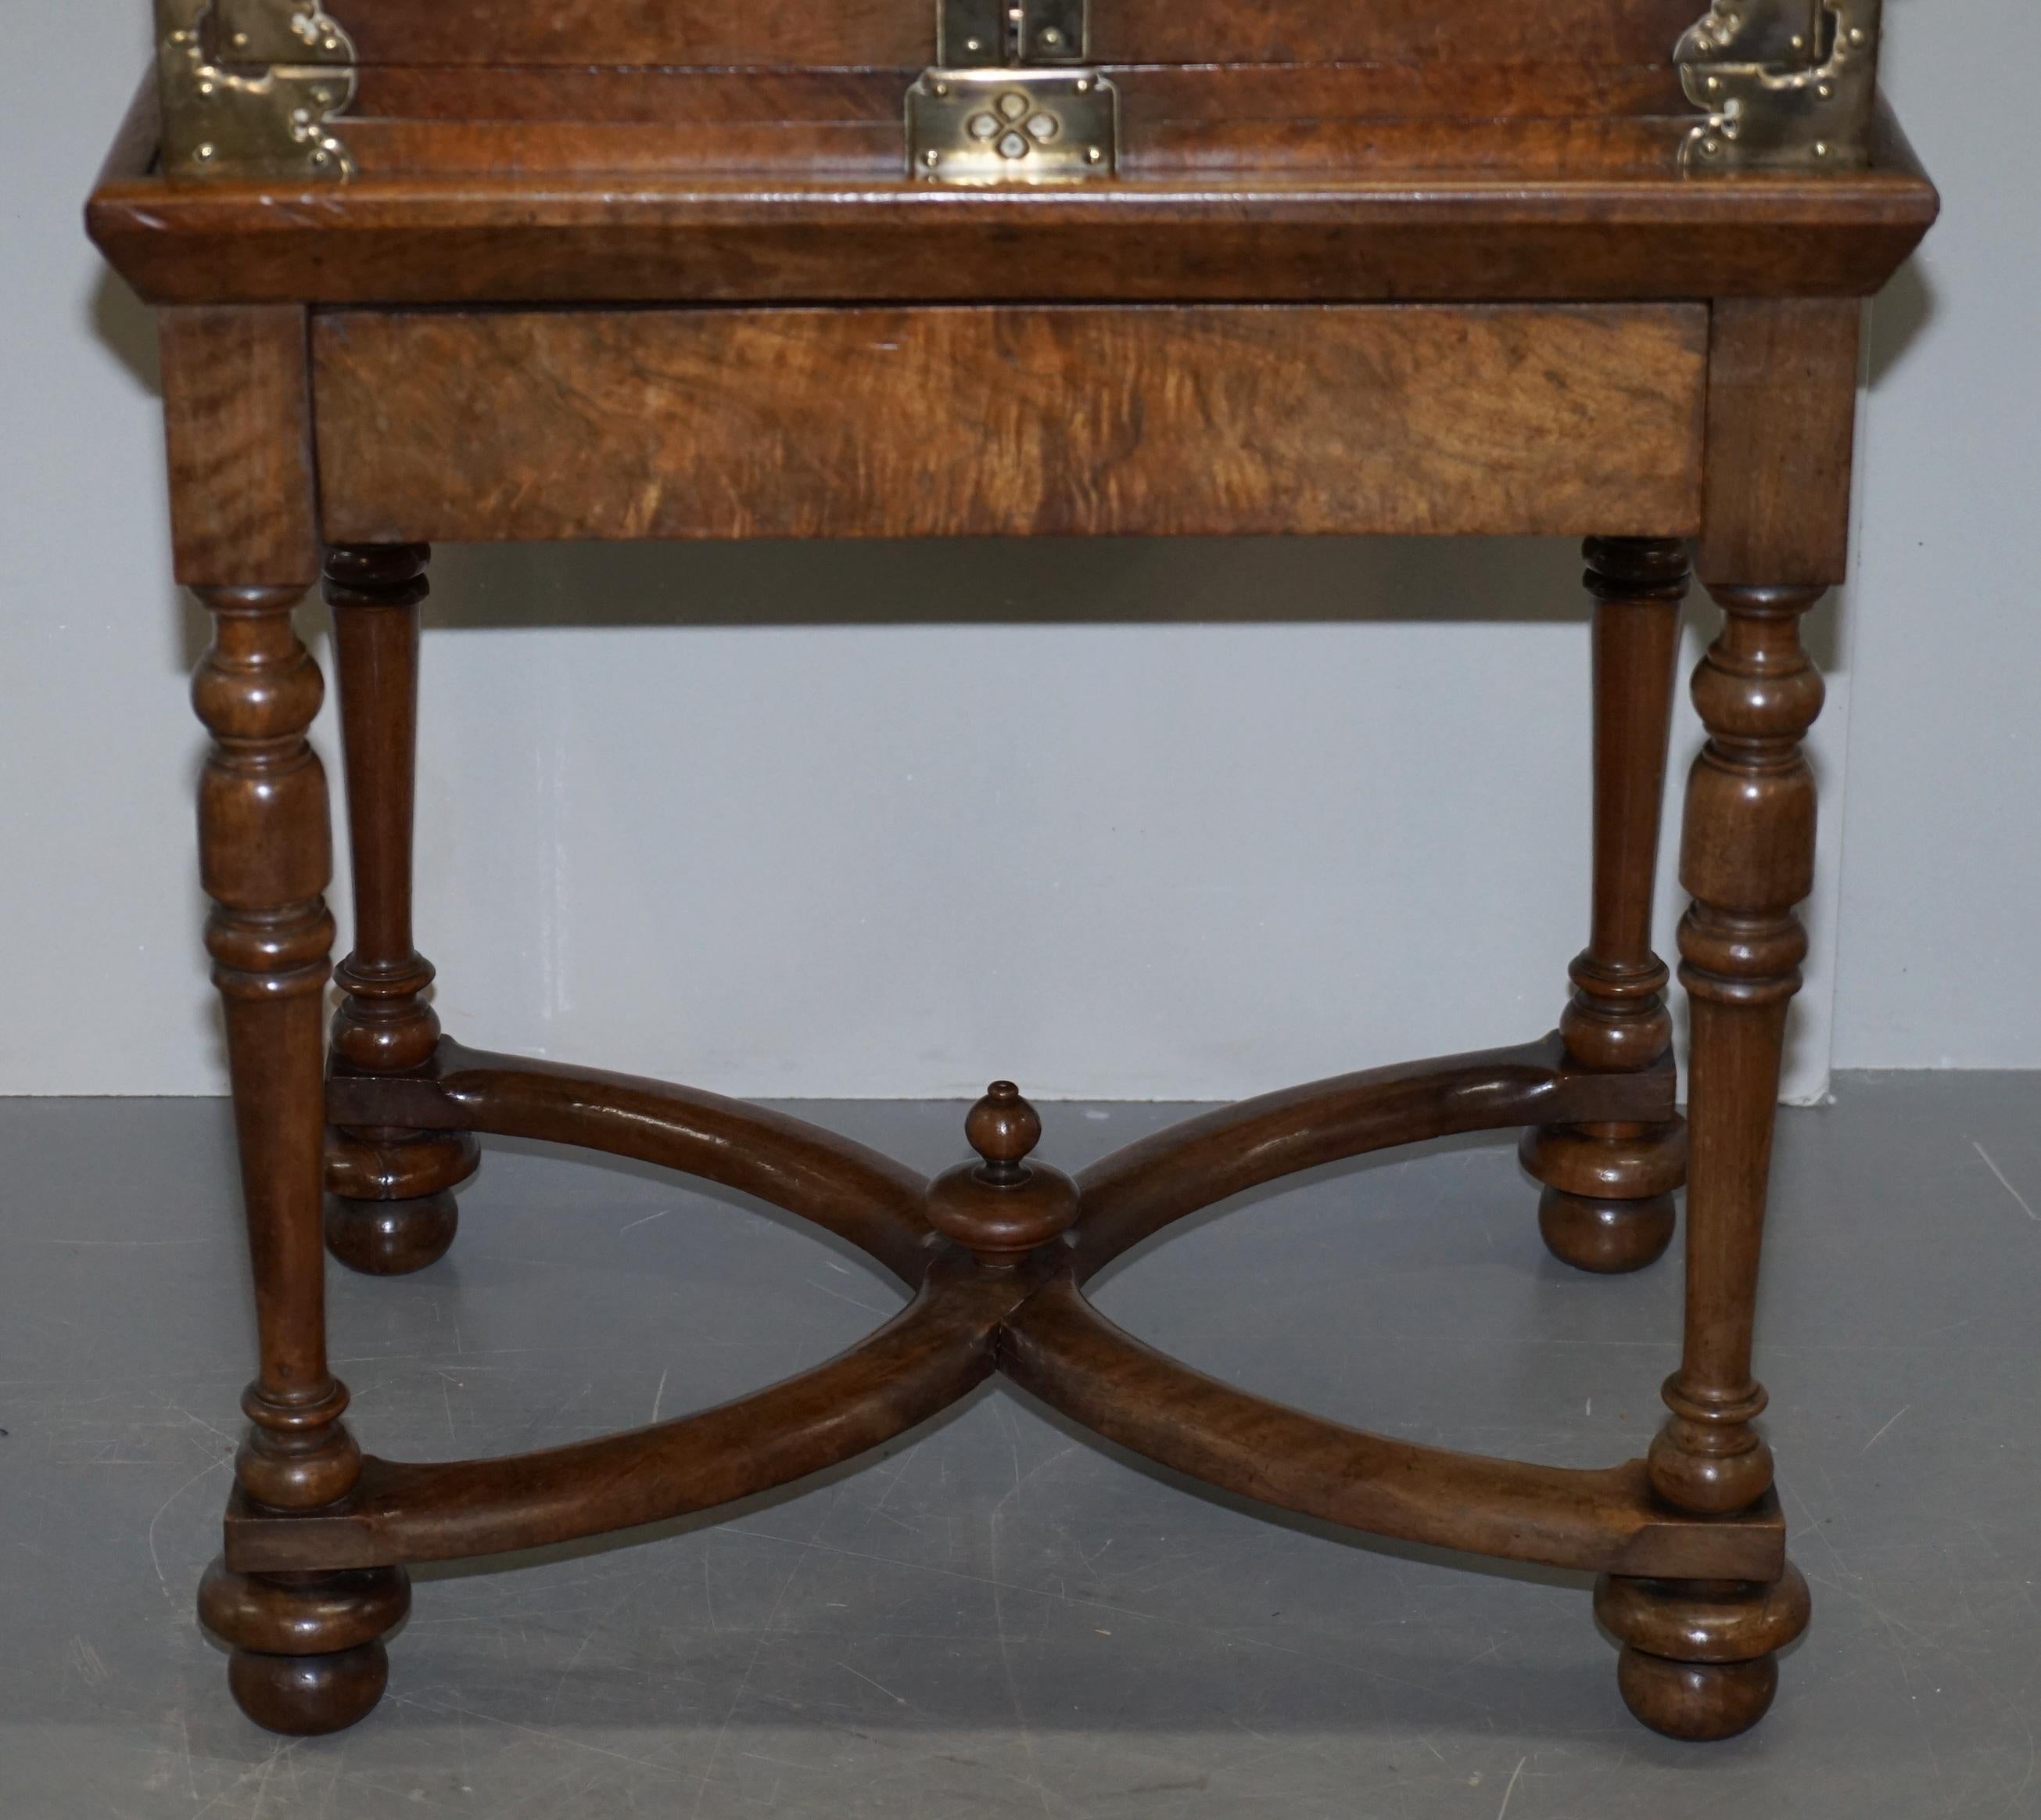 Sublime circa 1740 Portuguese Burr Walnut Campaign Cabinet on Stand Bank Drawers 5